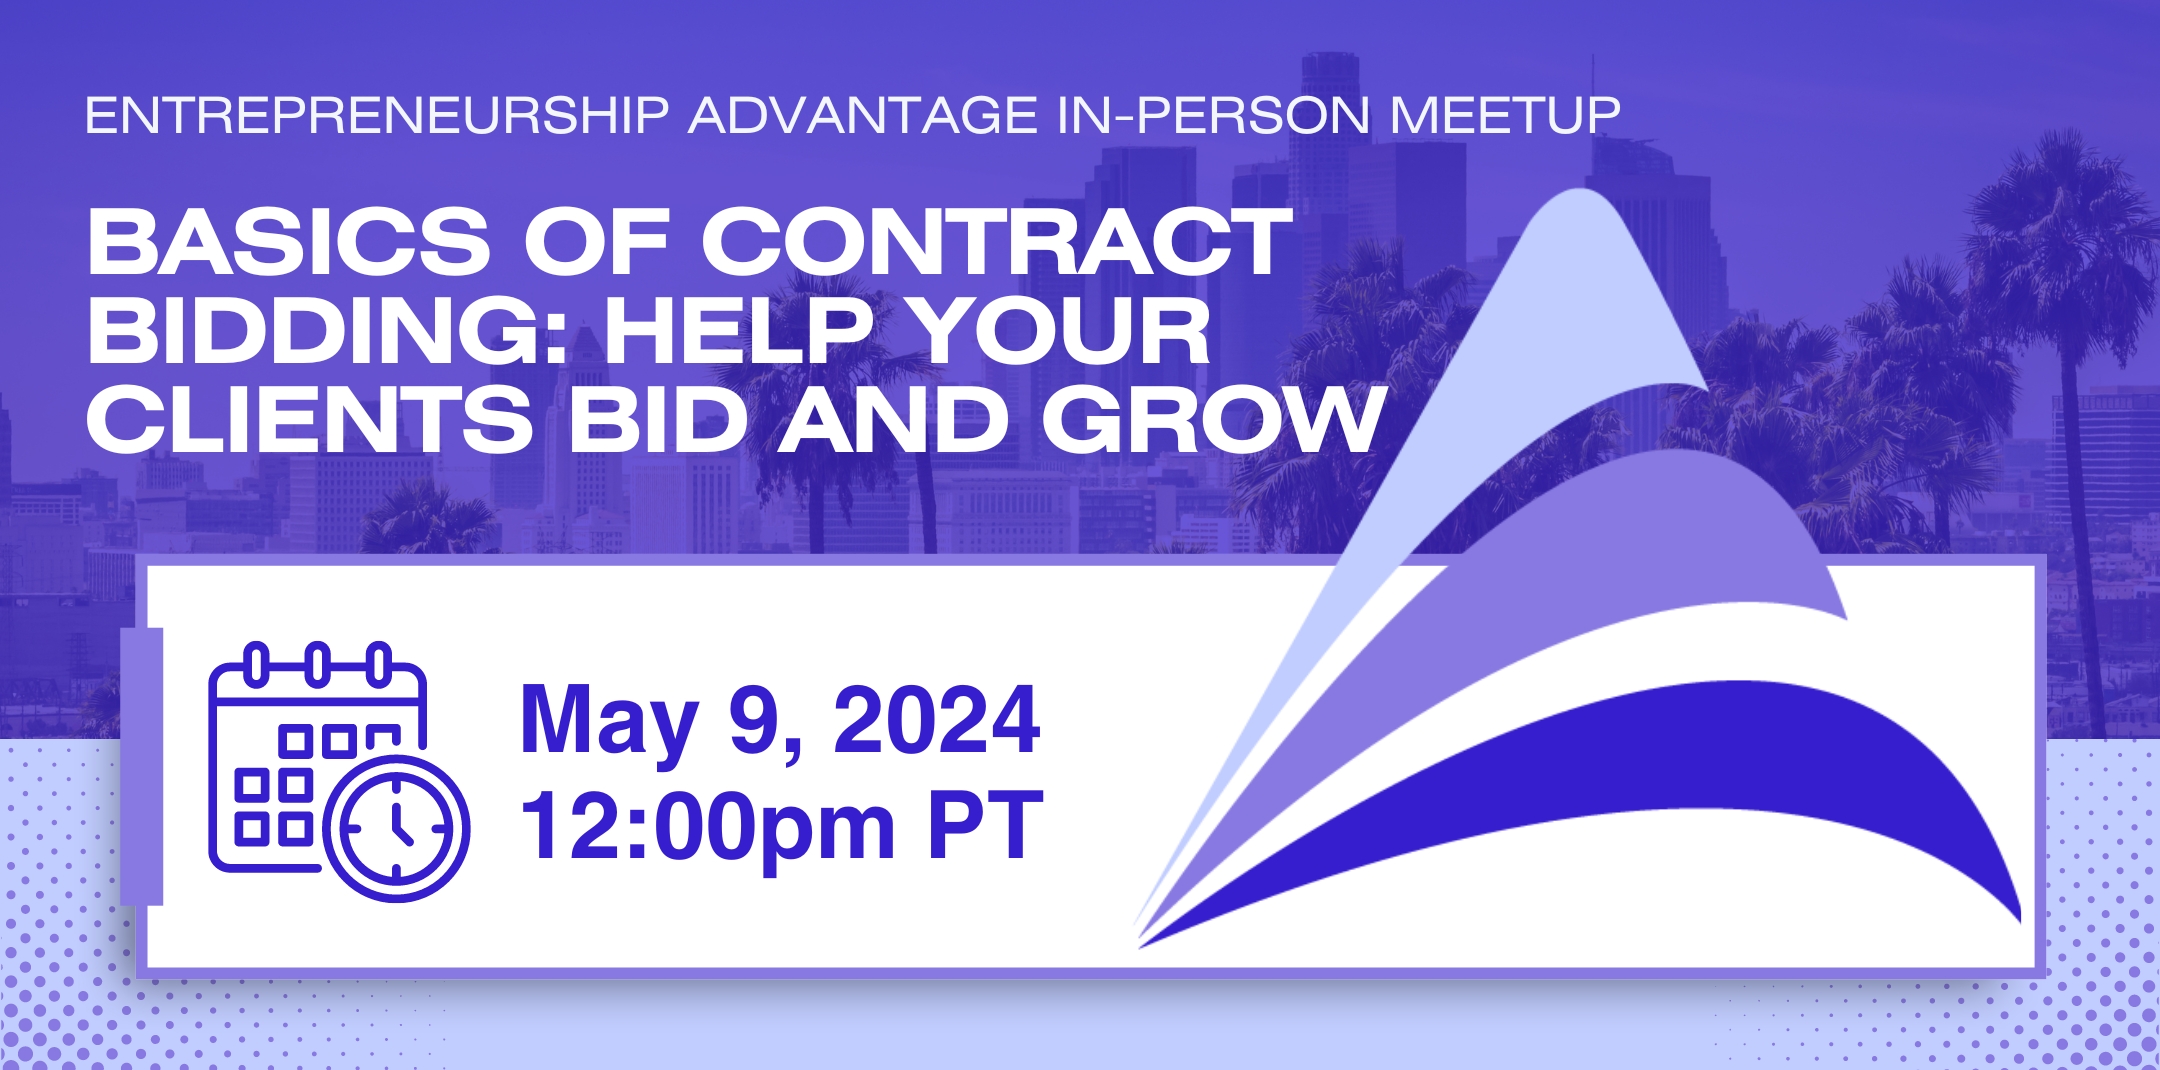 Basics of Contract Bidding: Help Your Clients Bid and Grow